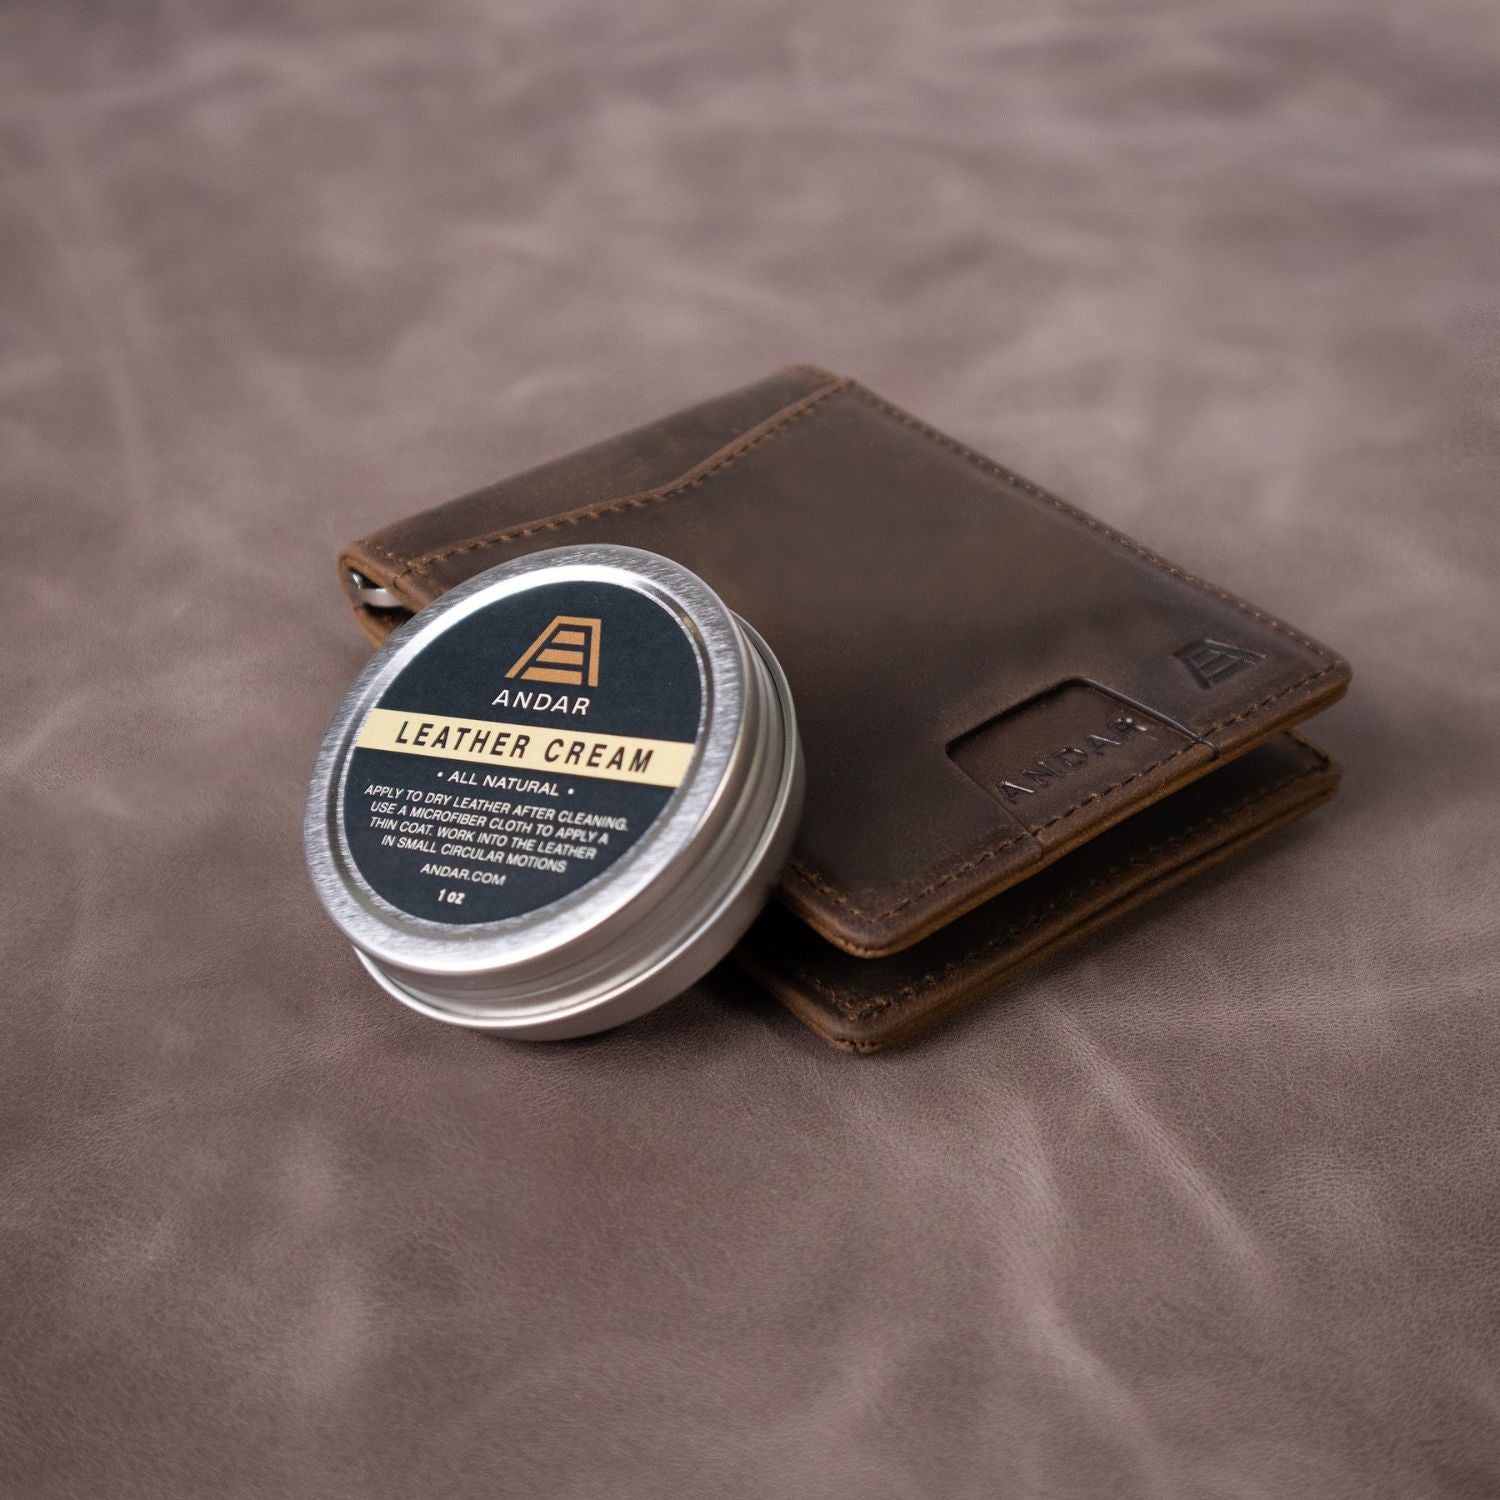 Griffin Shoe Care® Western Leather Conditioner - Premium Leather Care